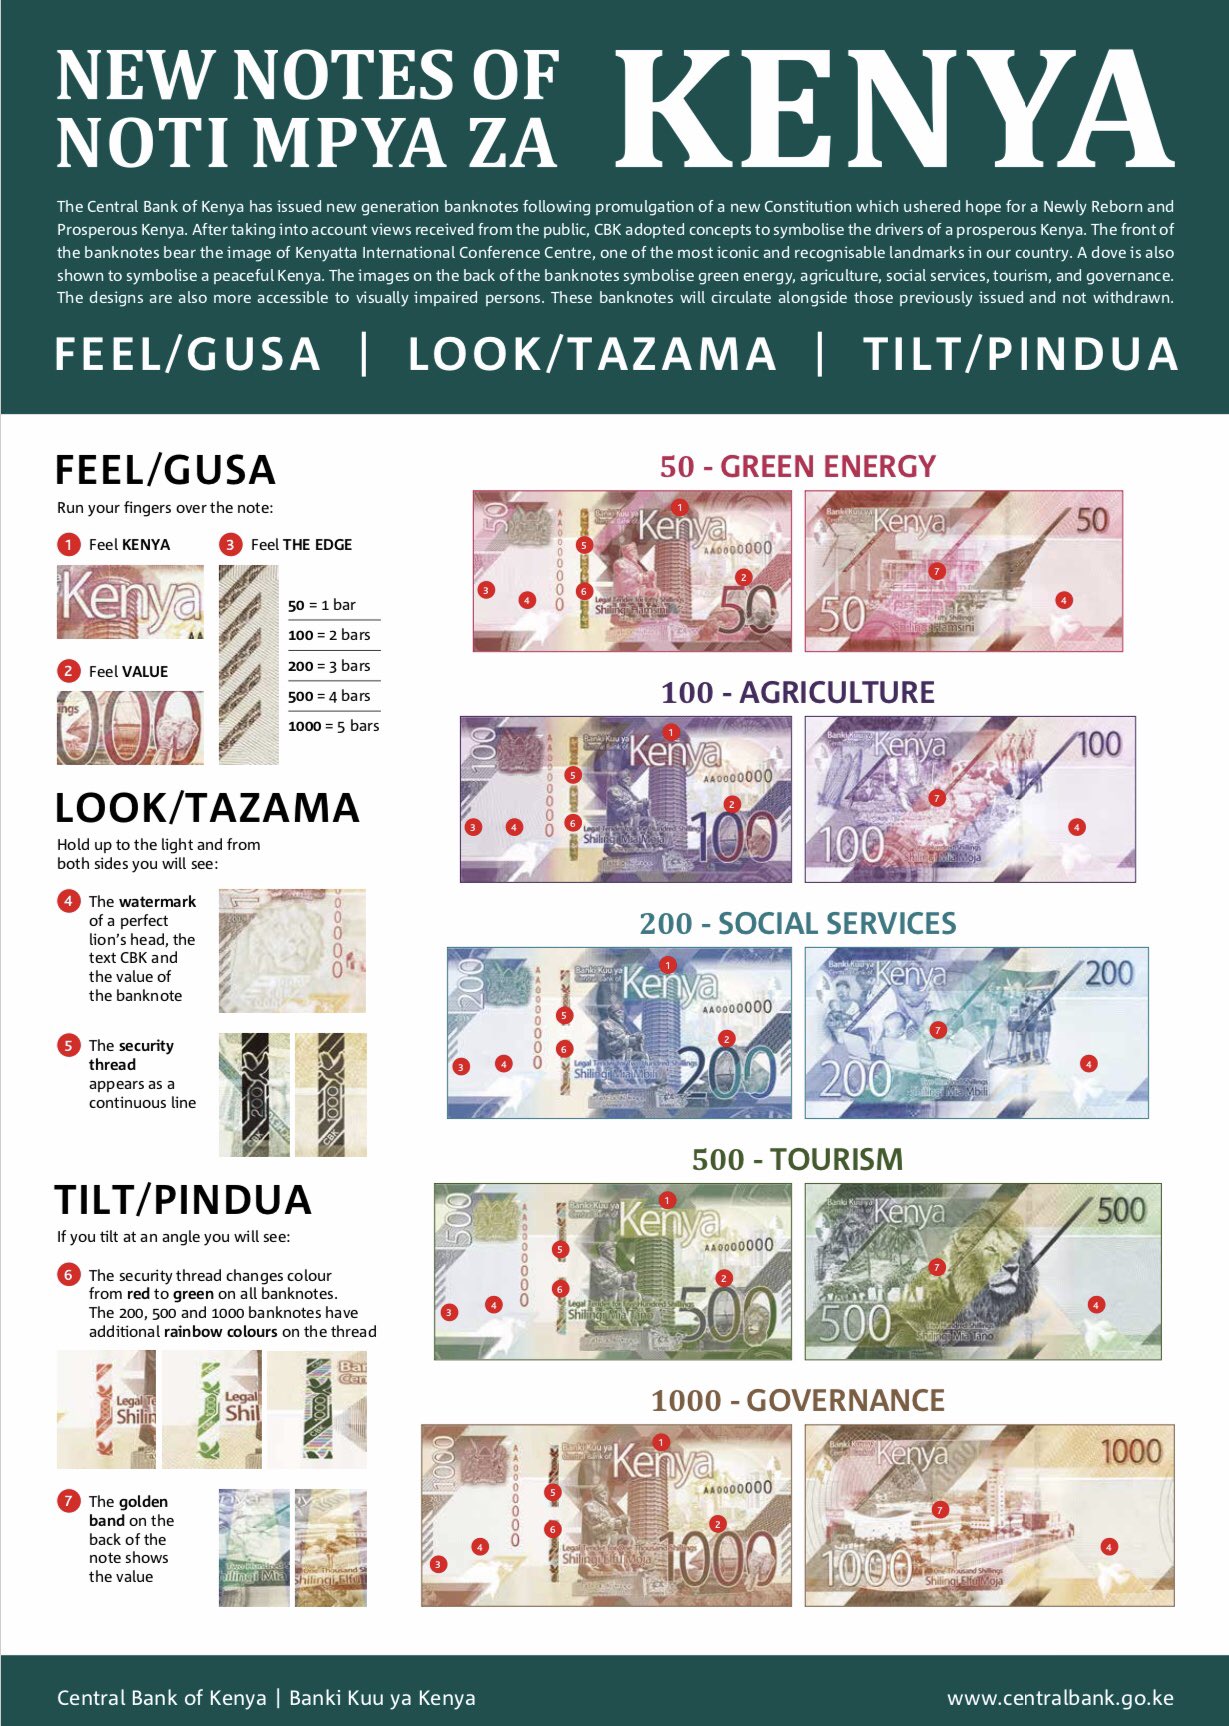 Pictured of the new notes and description of the features